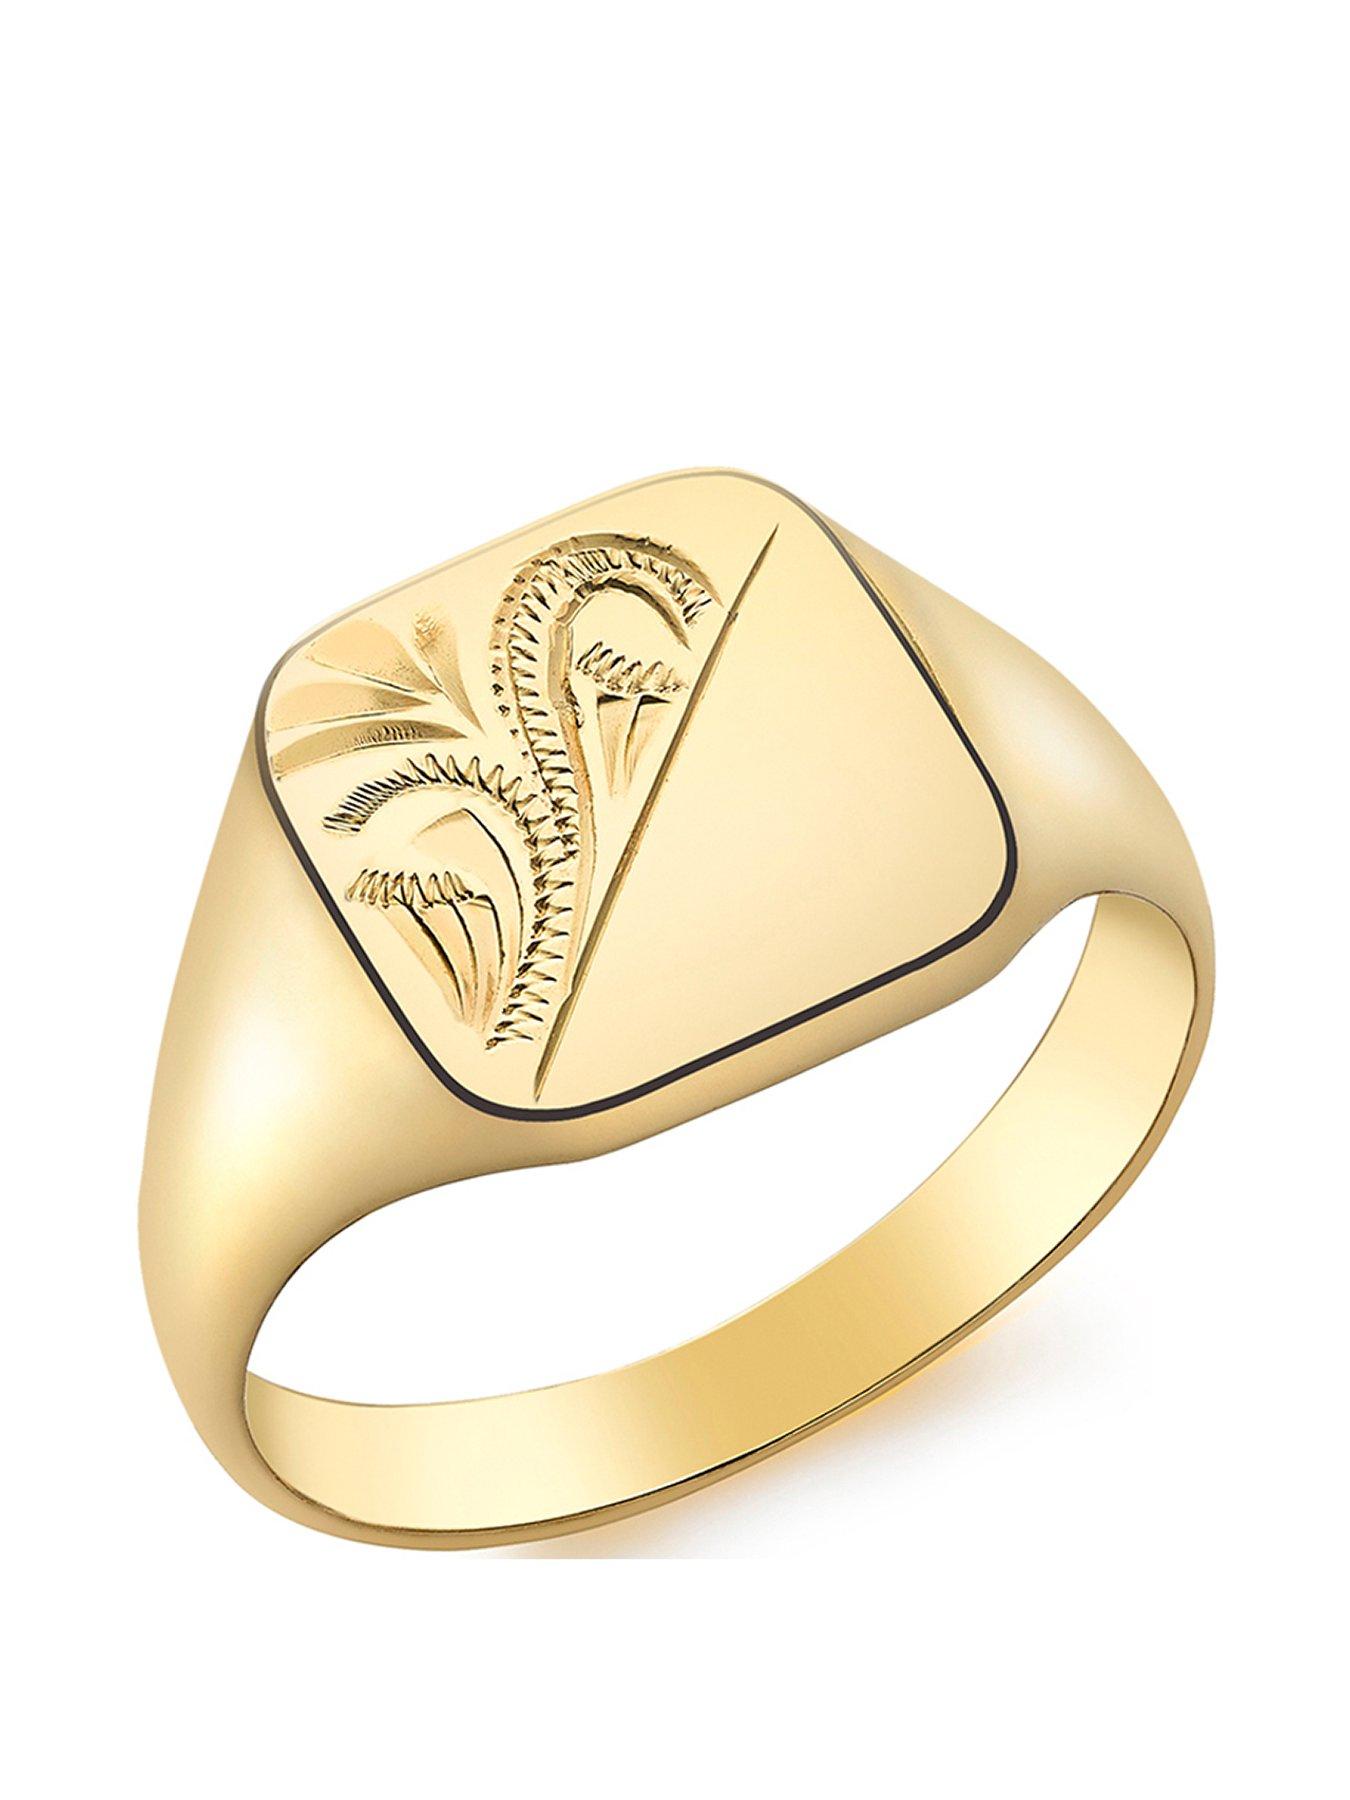 Jewellery & watches 9ct Gold Square Engraved Signet Ring